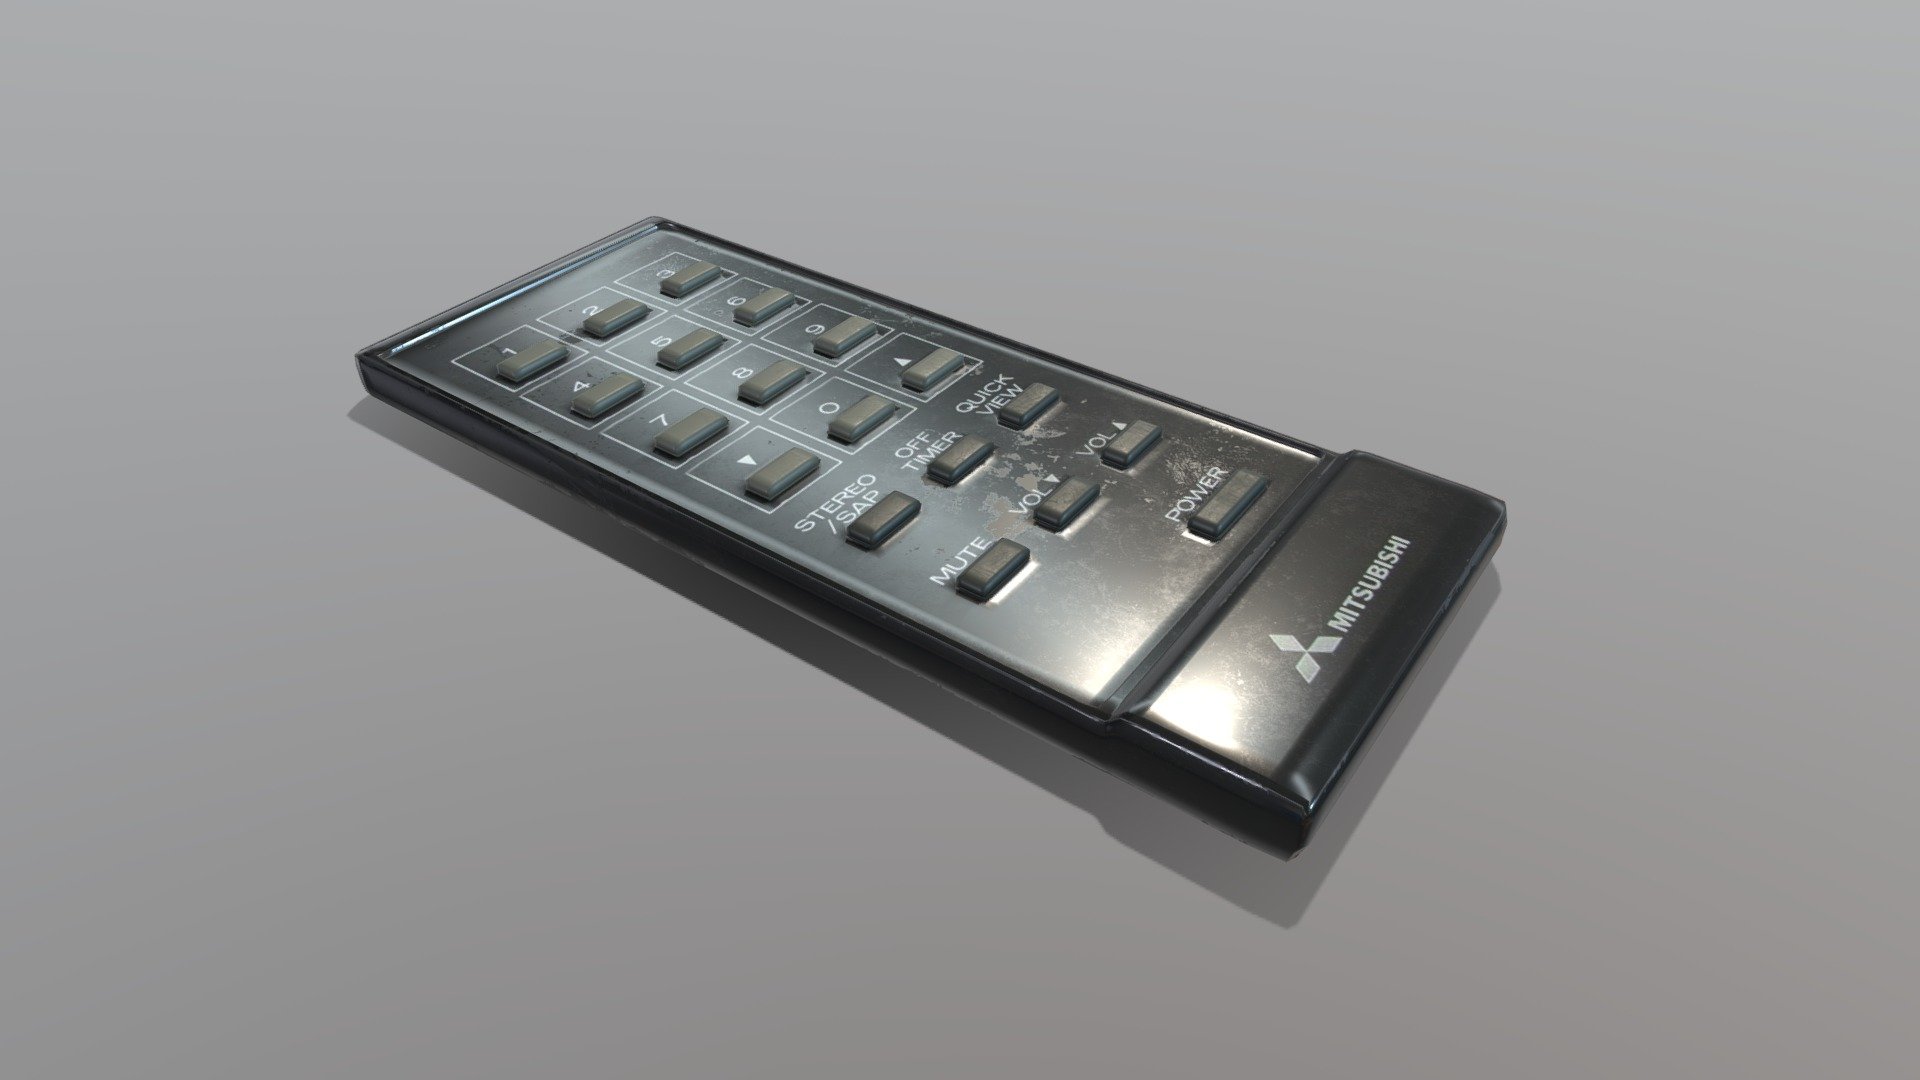 Old fashioned TV remote made with professional standards.

Medium poly and ready for a game environment, modeled to real world scale. Includes several file formats to use (fbx, ma, obj, stl) along with Basecolor, Normal, Roughness, and ORM maps at 1k, 2k, and 4k resolution.

I do not own any rights to Mitsubishi branding 3d model